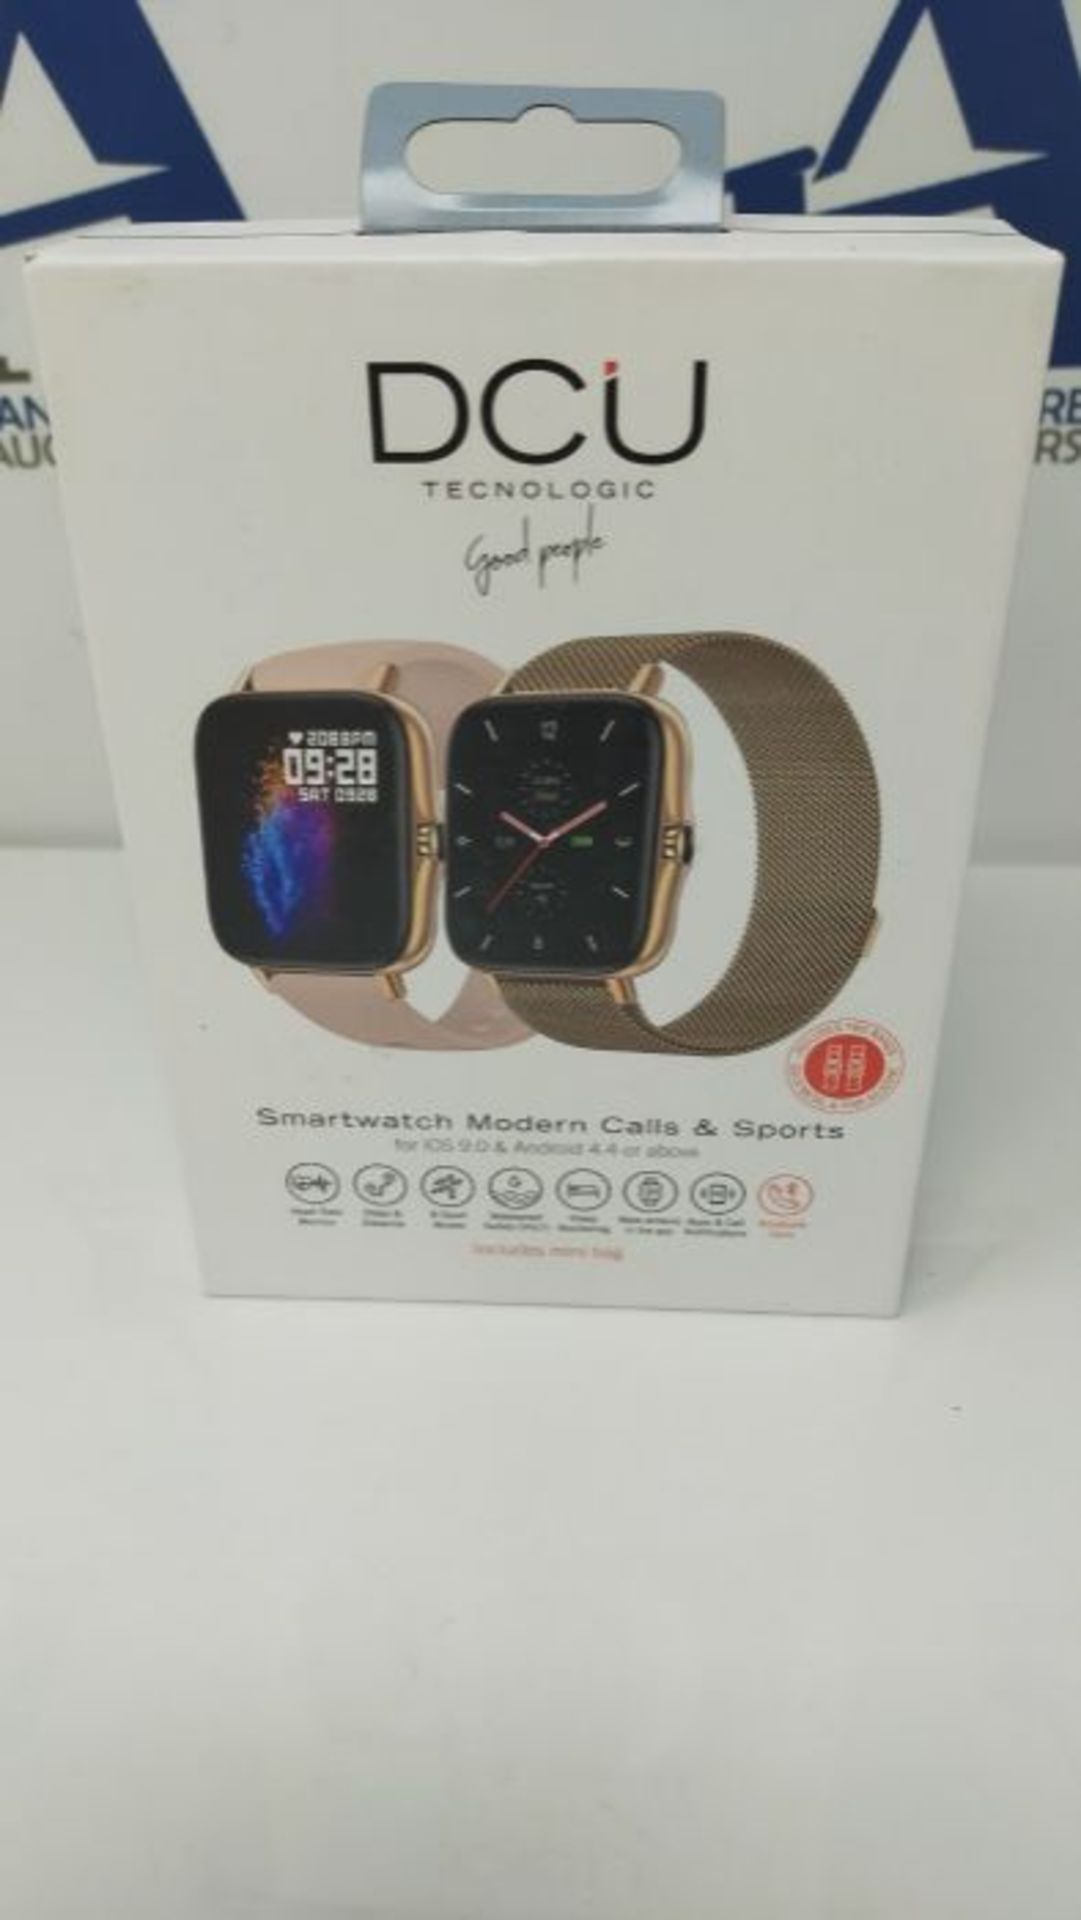 RRP £68.00 DCU TECNOLOGIC Modern Smartwatch, Smart Watch Calls, Apps Notifications and Calls, 8 S - Image 2 of 3